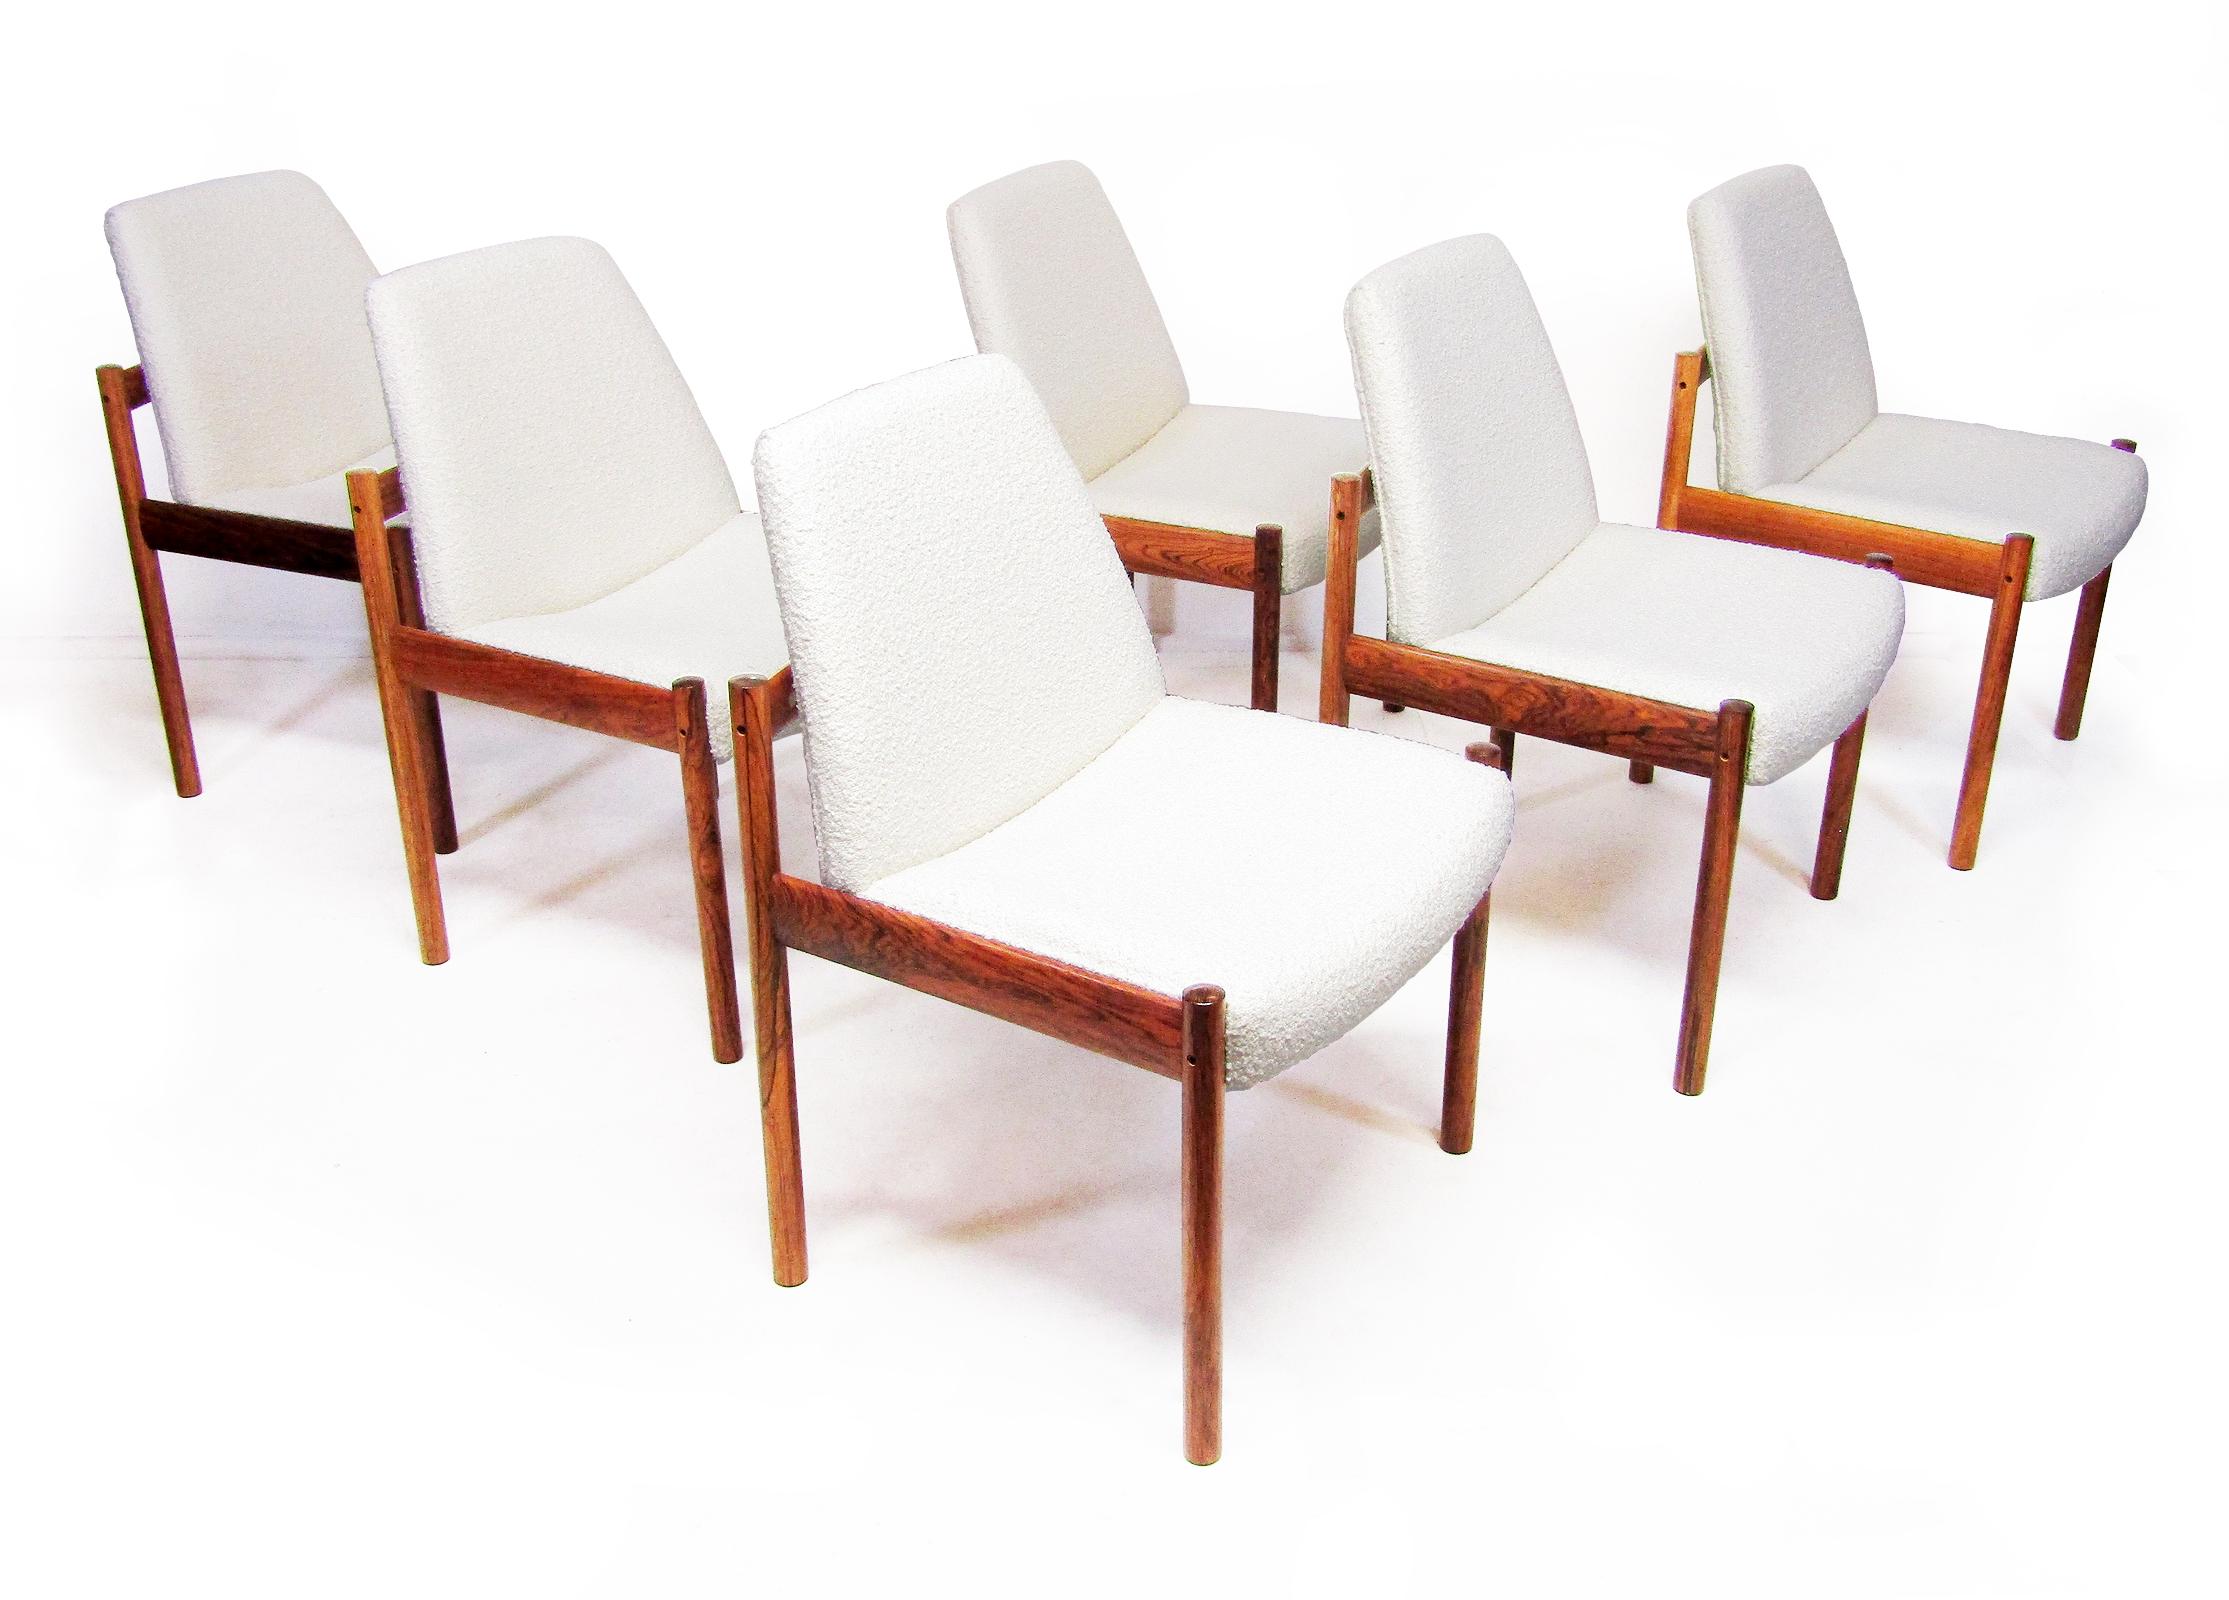 A set of six 1960s dining or conference chairs in Rio rosewood and bouclé fabric by Sven Ivar Dysthe for Dokka.

They have been reconditioned and reupholstered, and are sumptuous examples of mid 20th century Norwegian design.

The rosewood has a